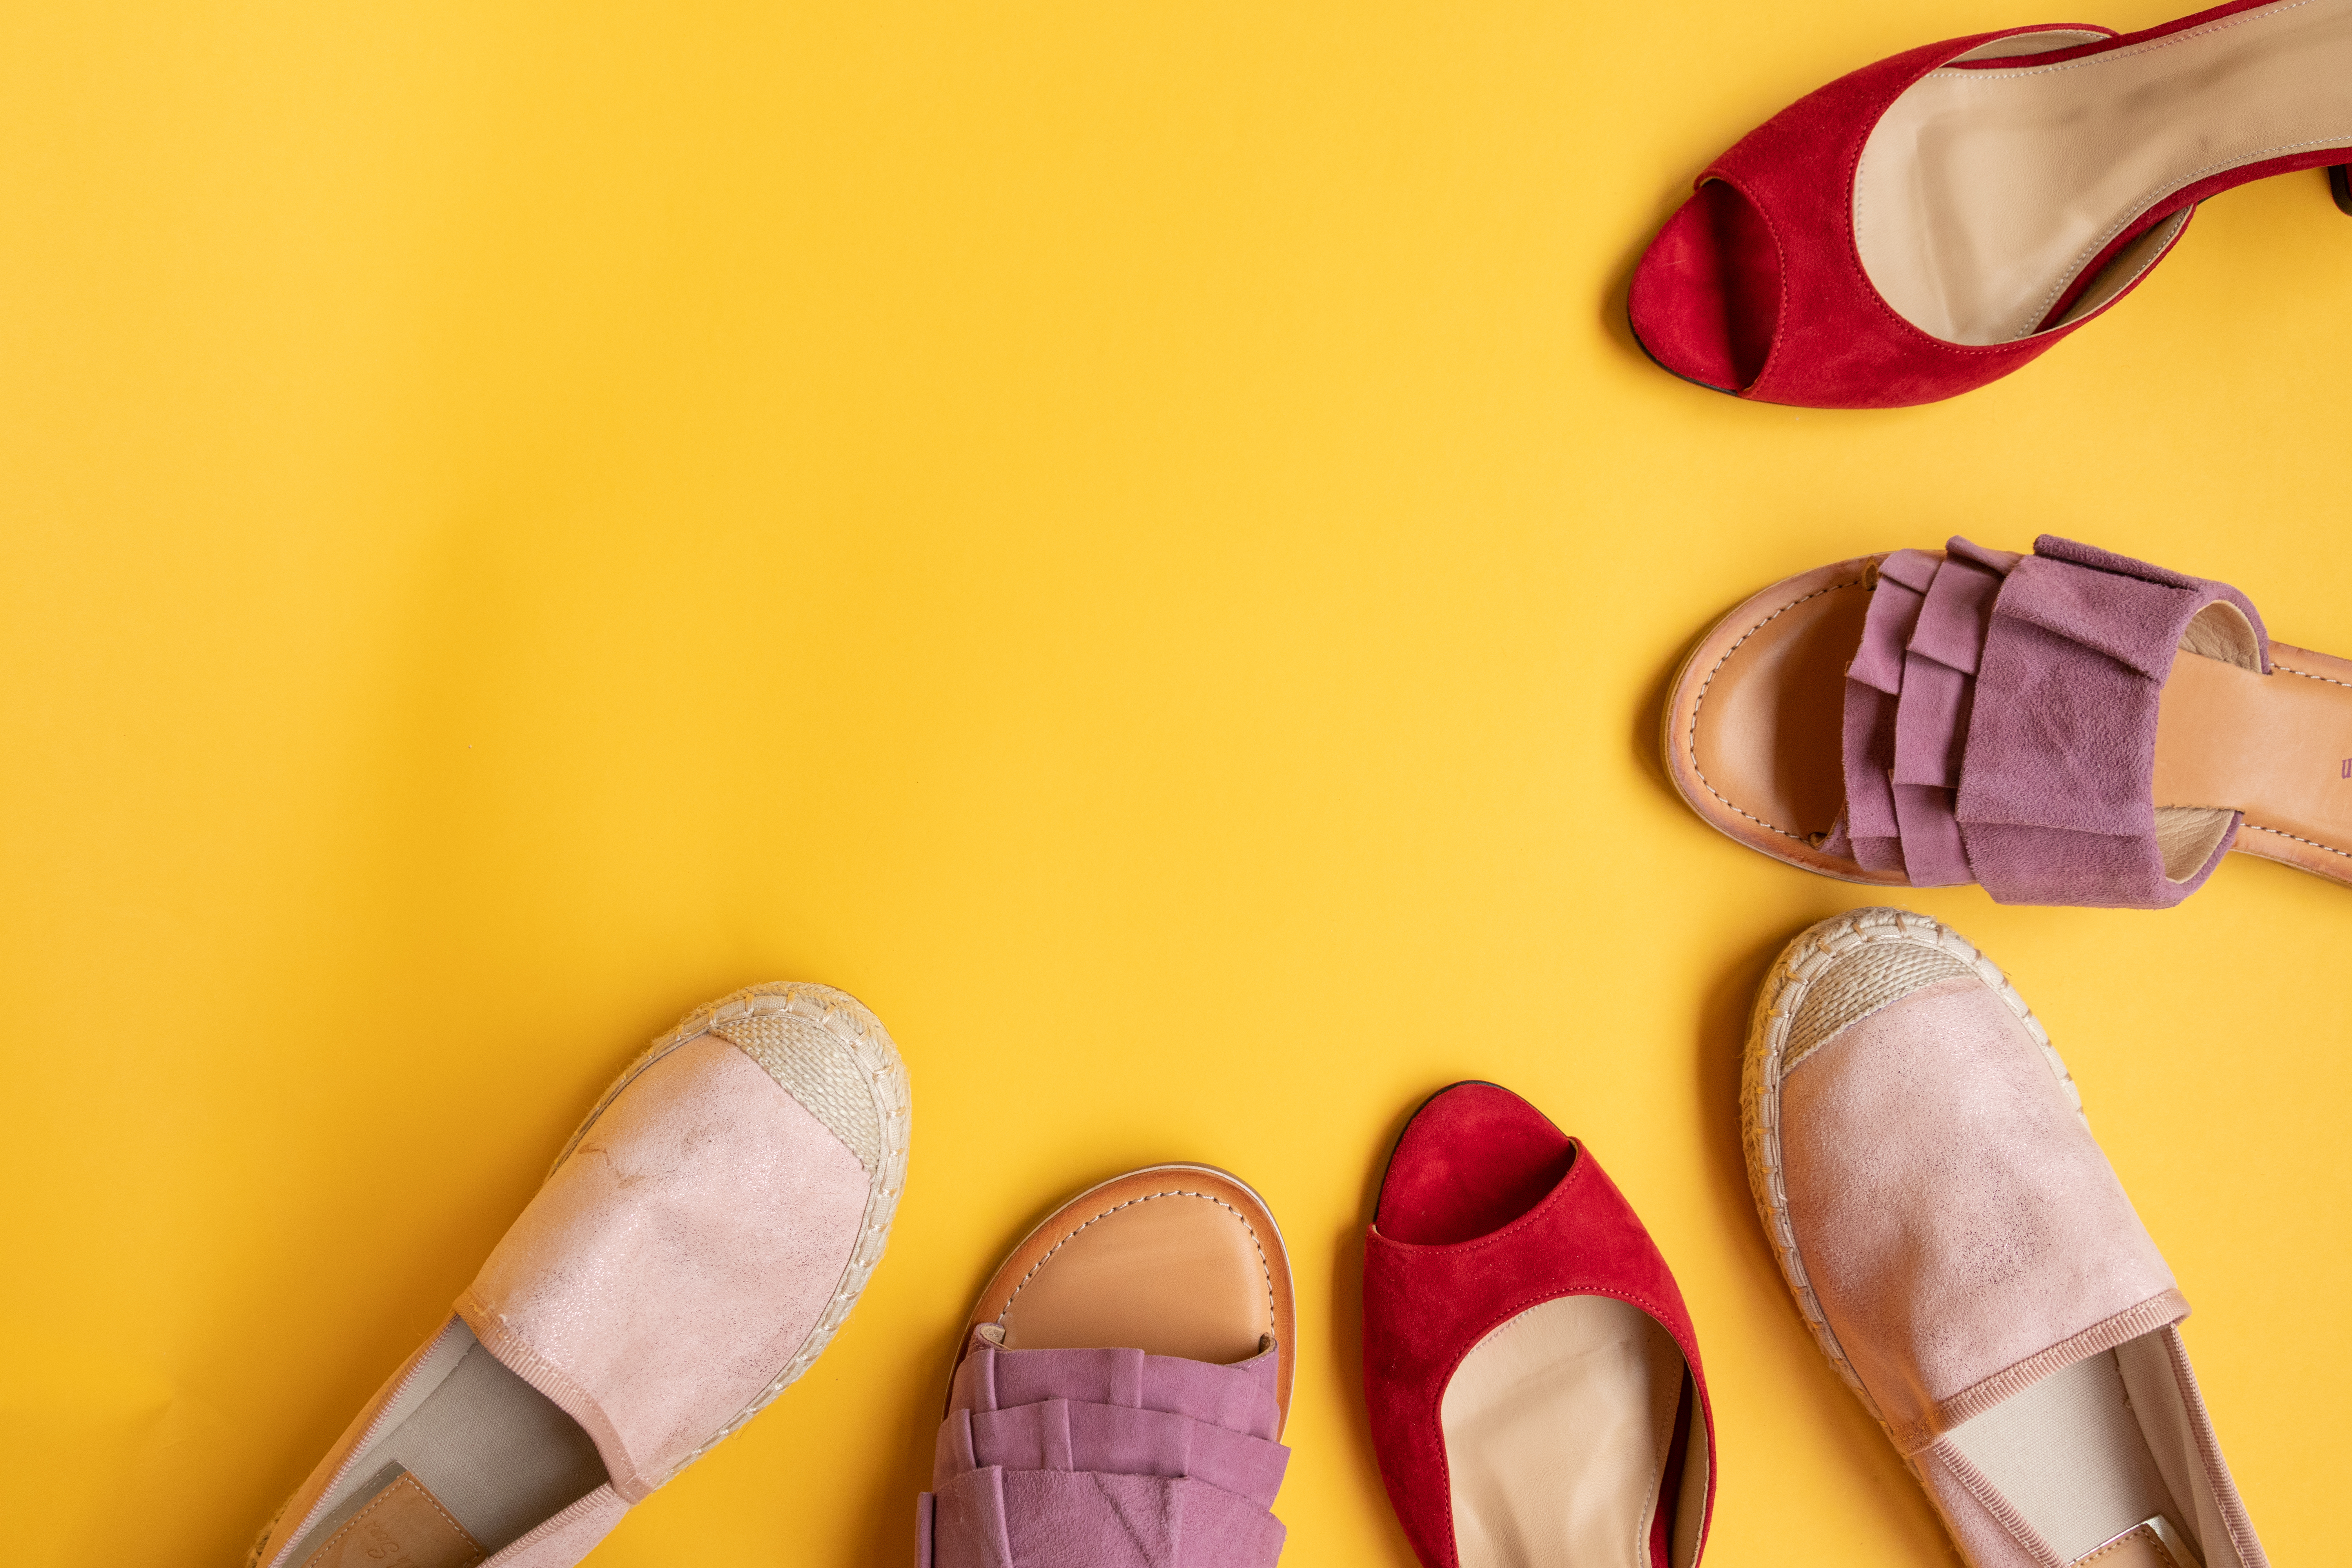 A variety of shoes on a yellow background.